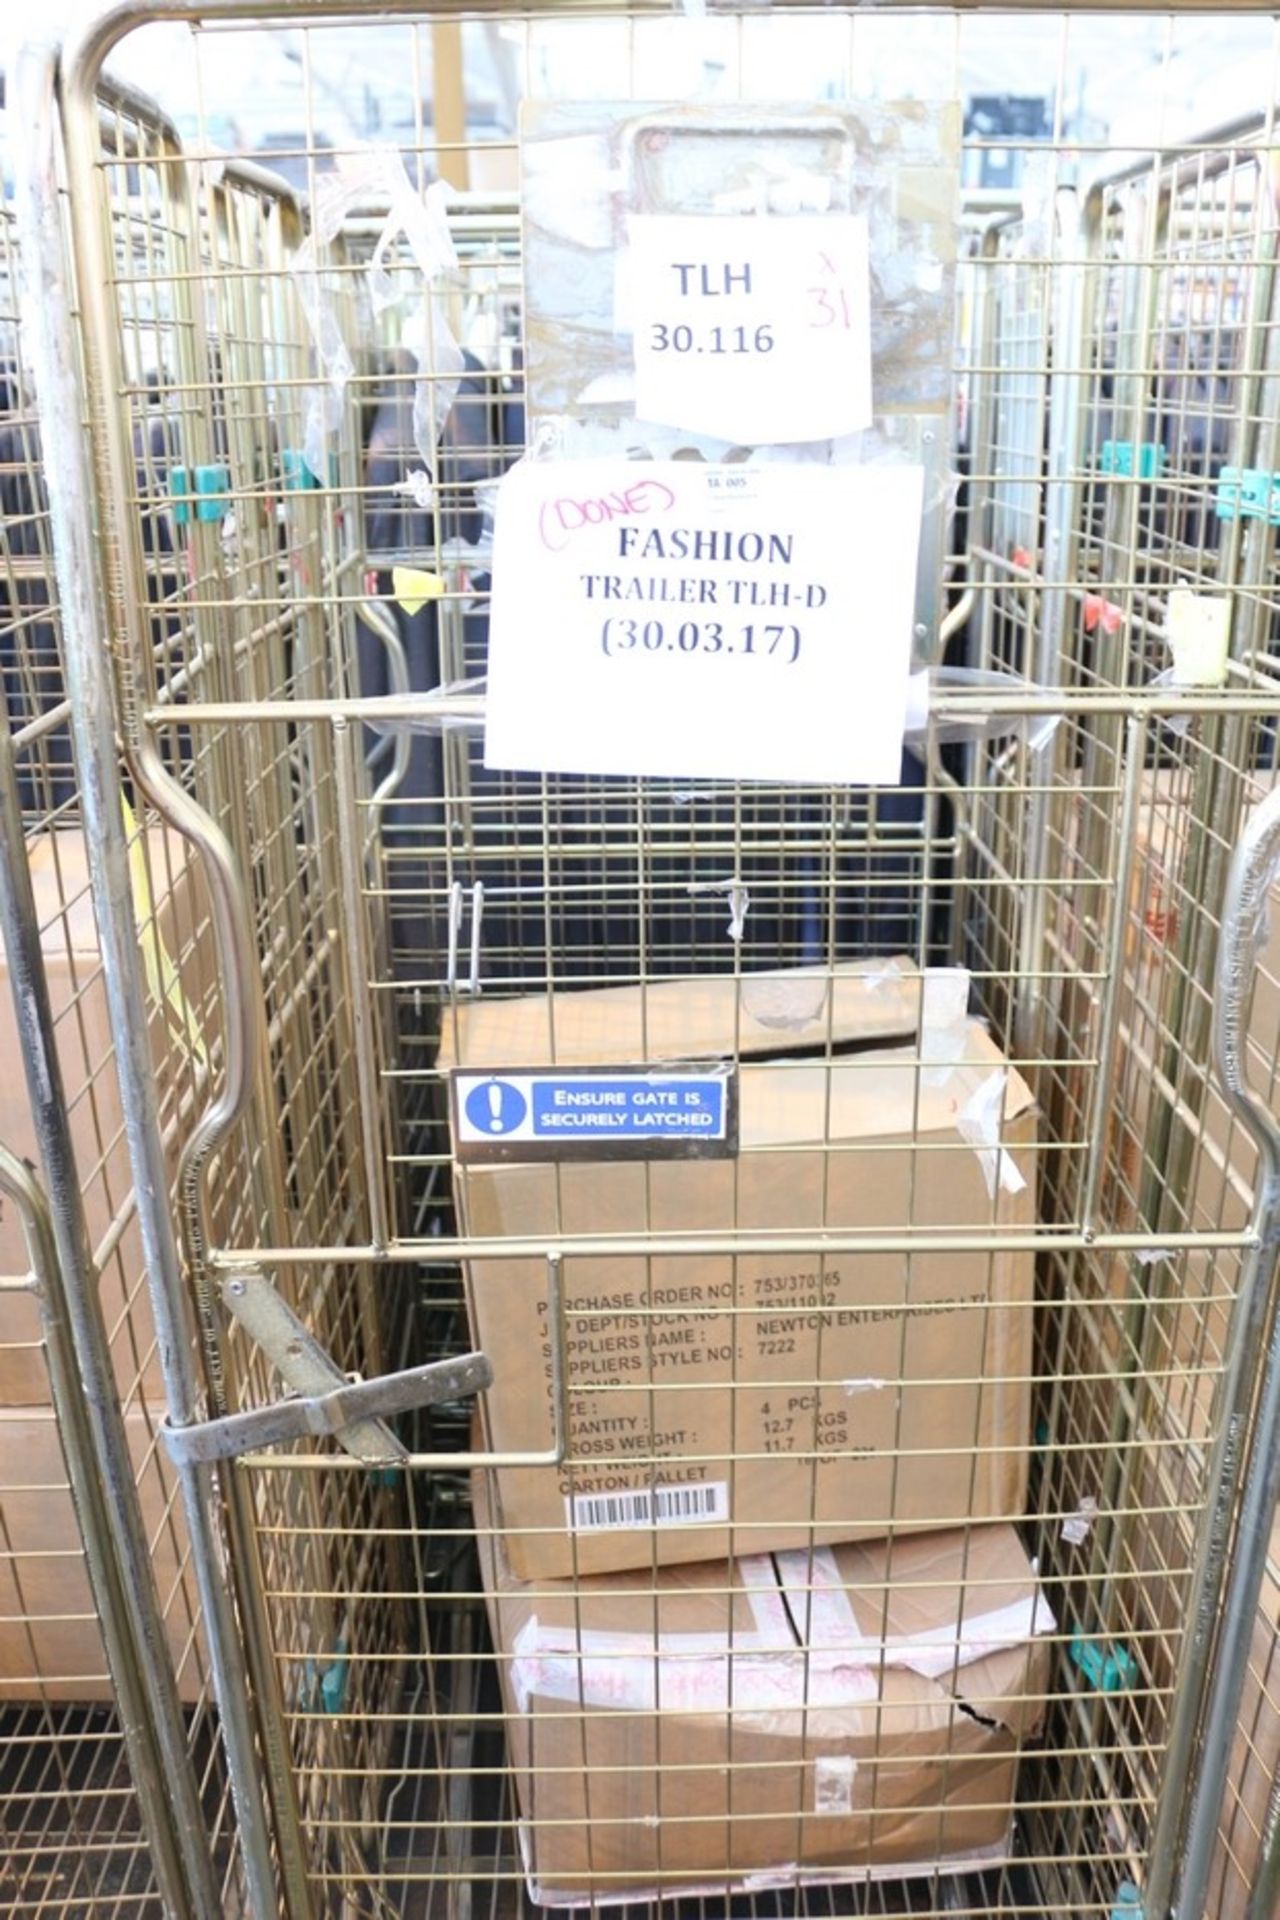 ONE CAGE TO CONTAIN APPROX 31 UNITS OF UNUSED ASSORTED DESIGNER ITEMS RANGING FROM MEN'S/WOMEN'S/